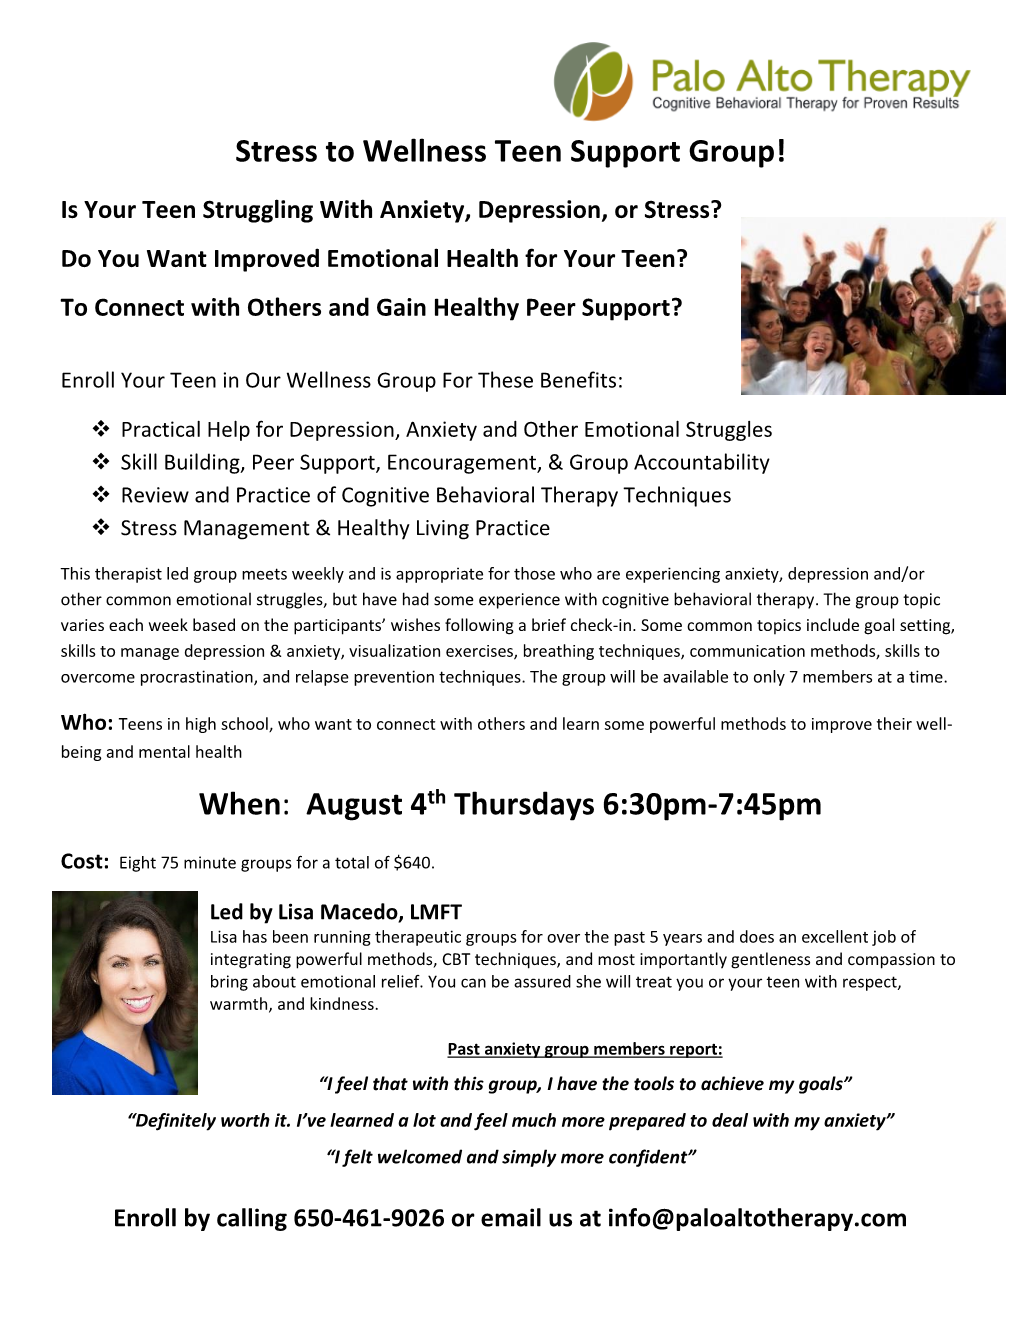 Stress to Wellness Teen Support Group! When: August 4Th Thursdays 6:30Pm-7:45Pm